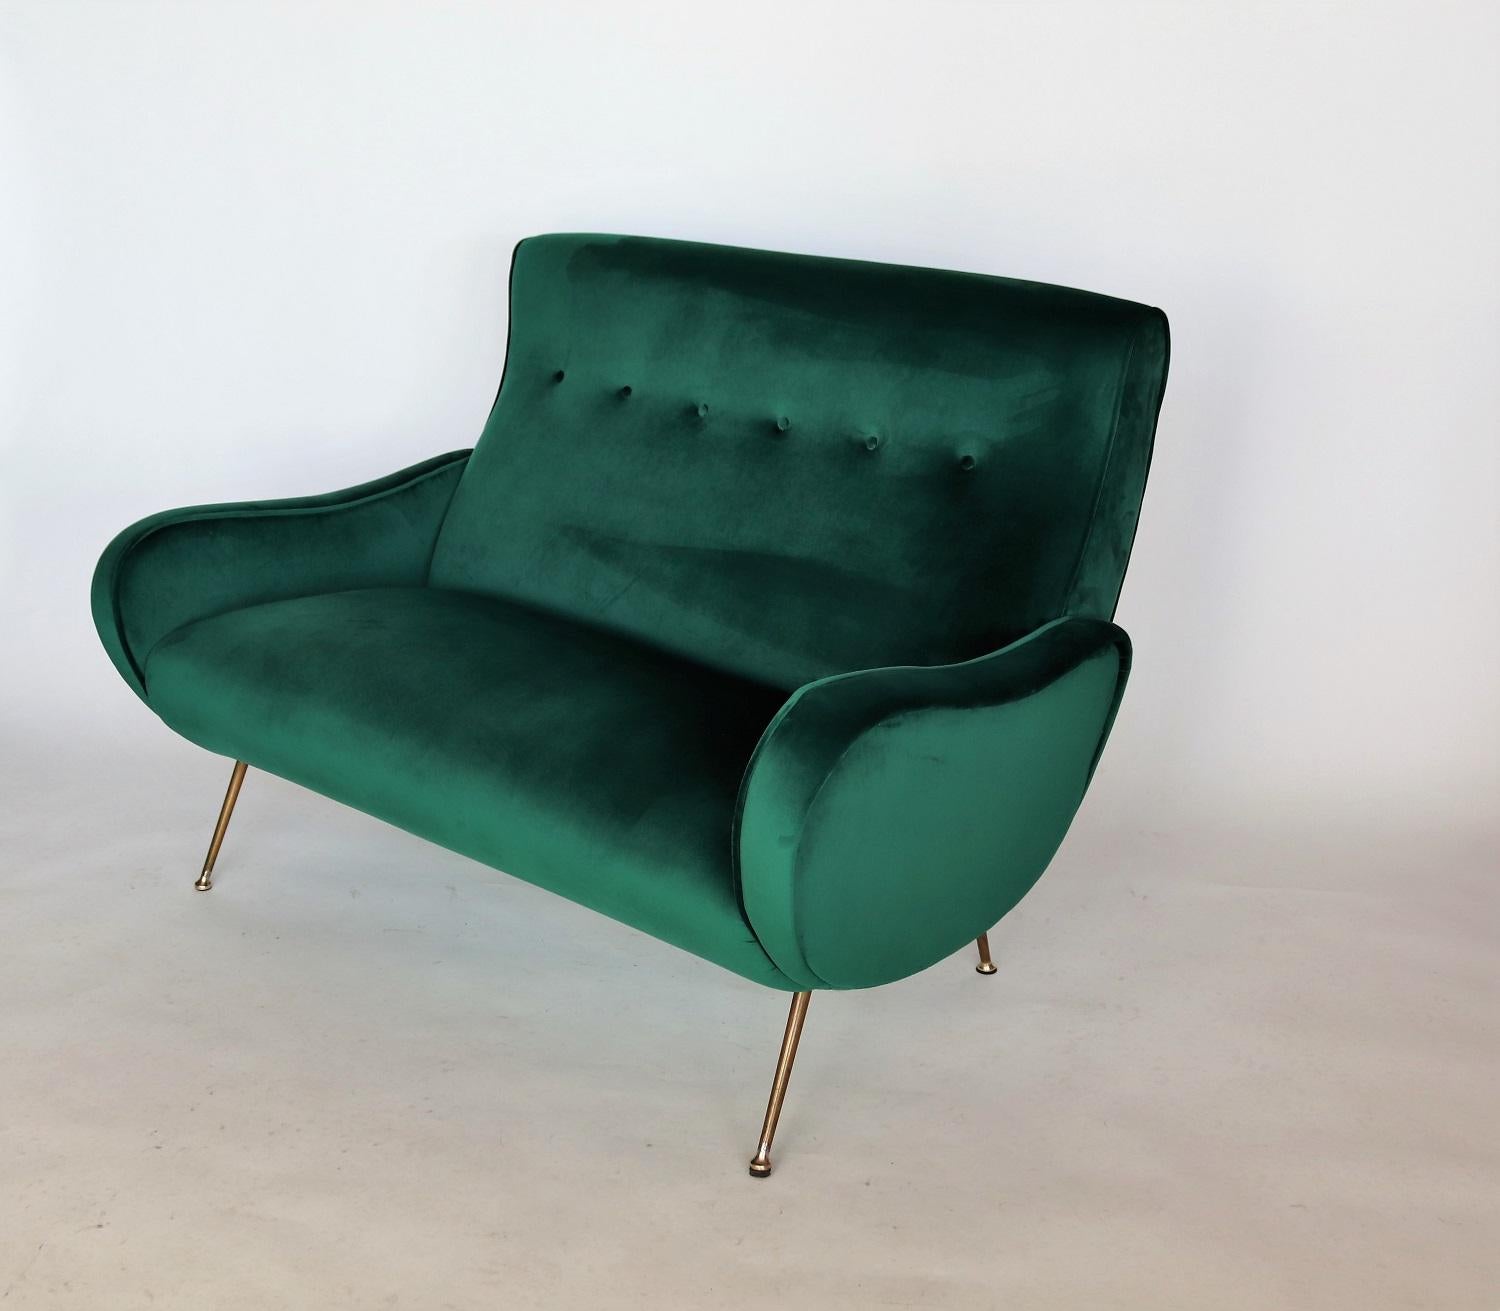 Polished Italian Midcentury Sofa or Settee in New Green Velvet and Brass Tipps, 1950s For Sale